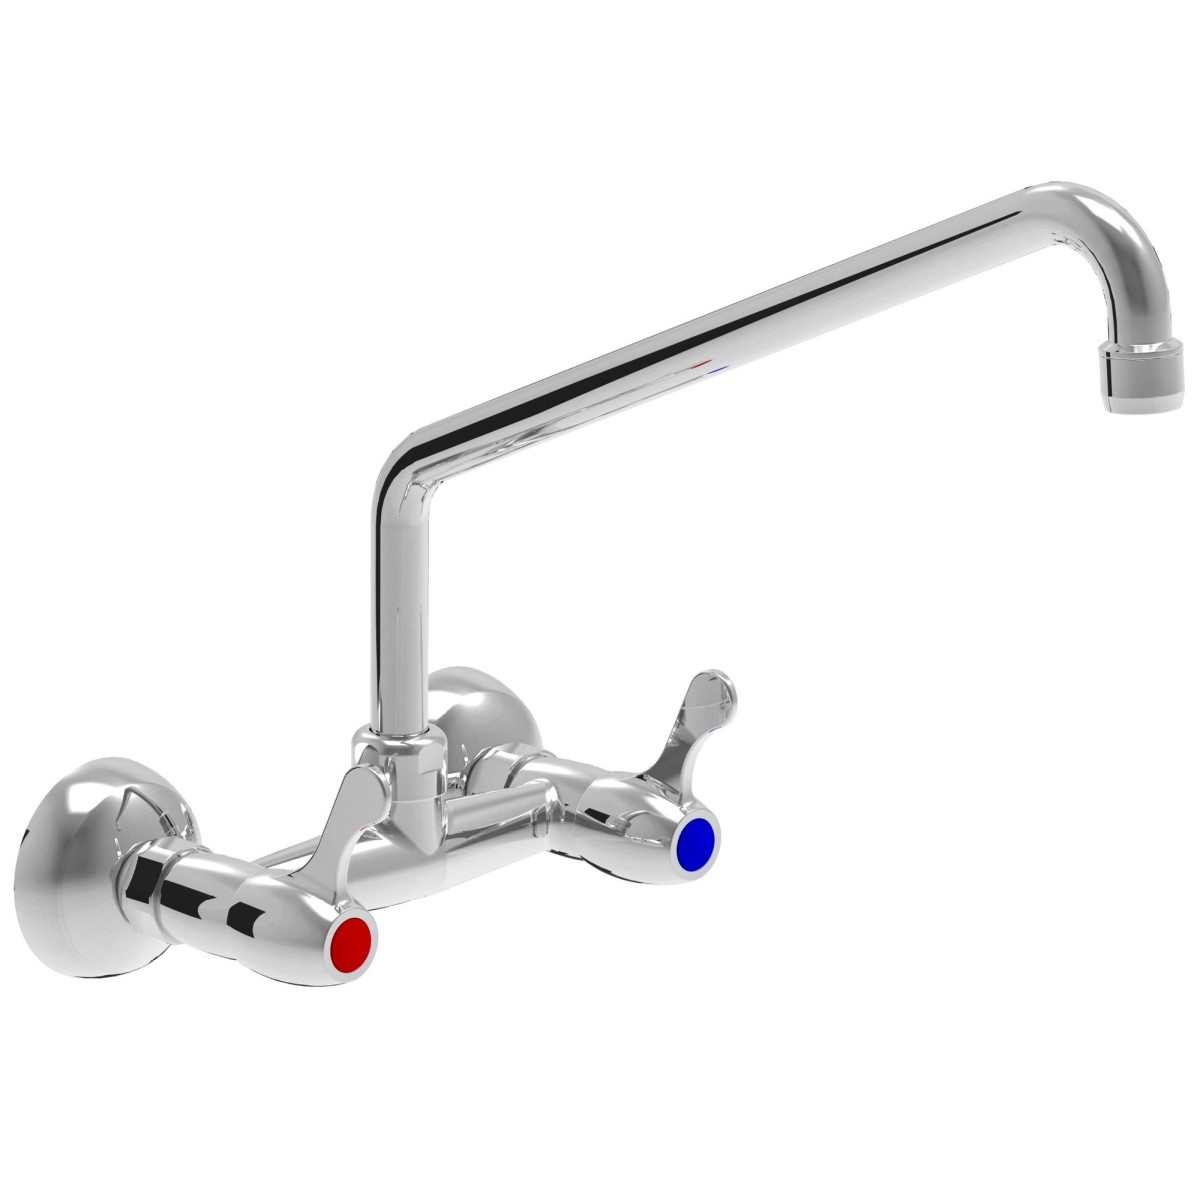 Two holes wall mounted mixer tap with 1/4 turn handles upper outlet